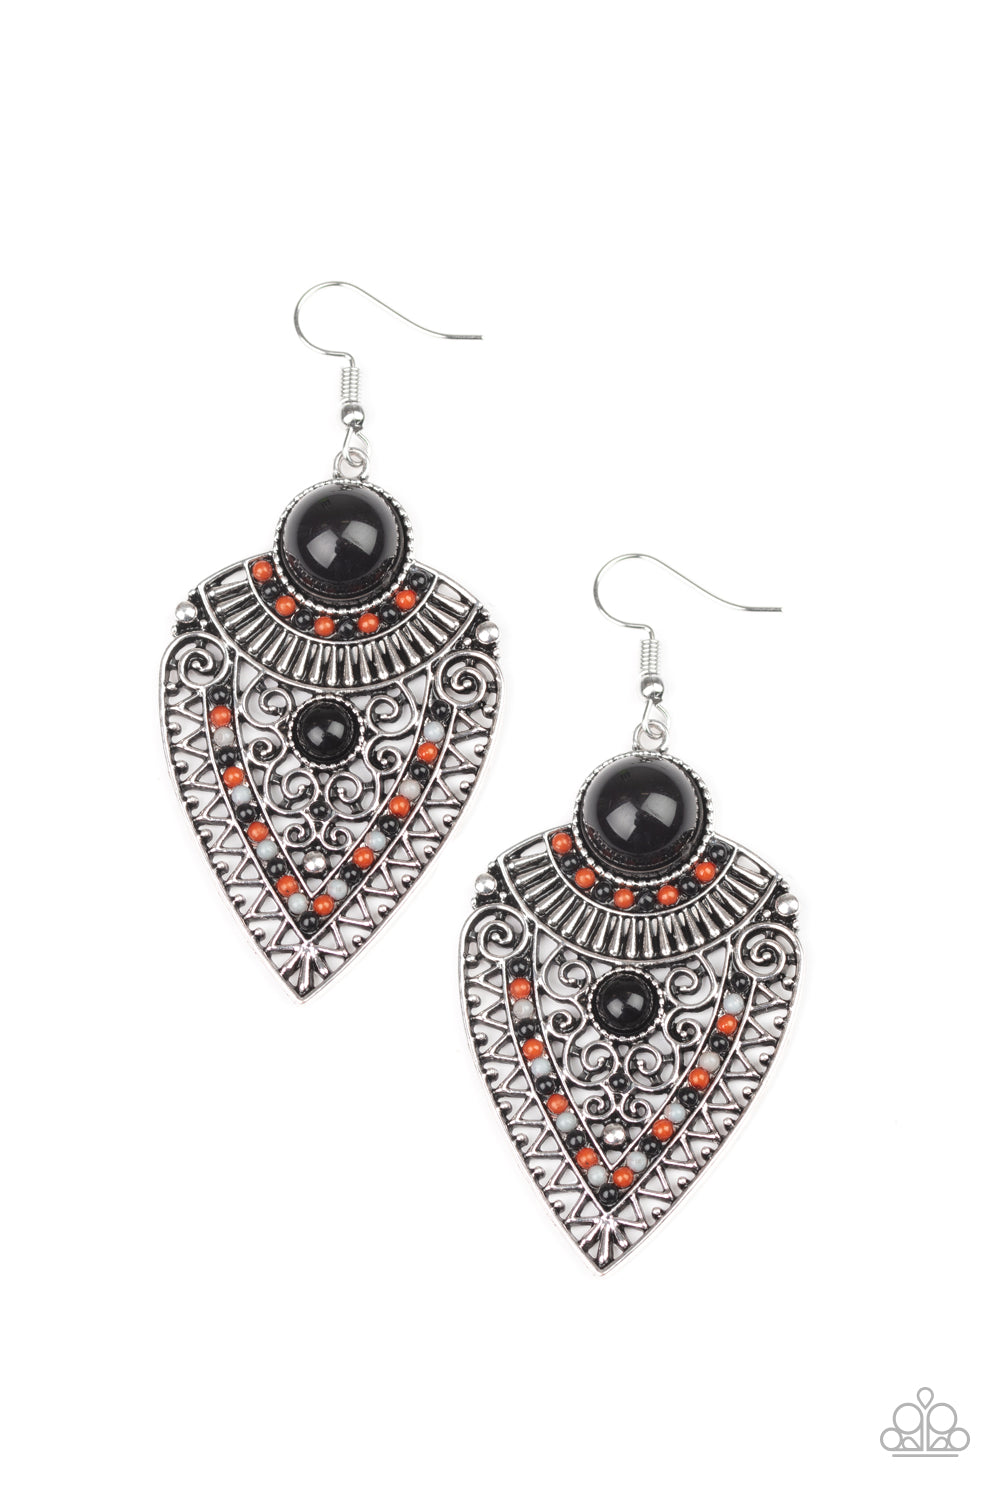 Paparazzi Accessories Tribal Territory - Black Earrings - Lady T Accessories